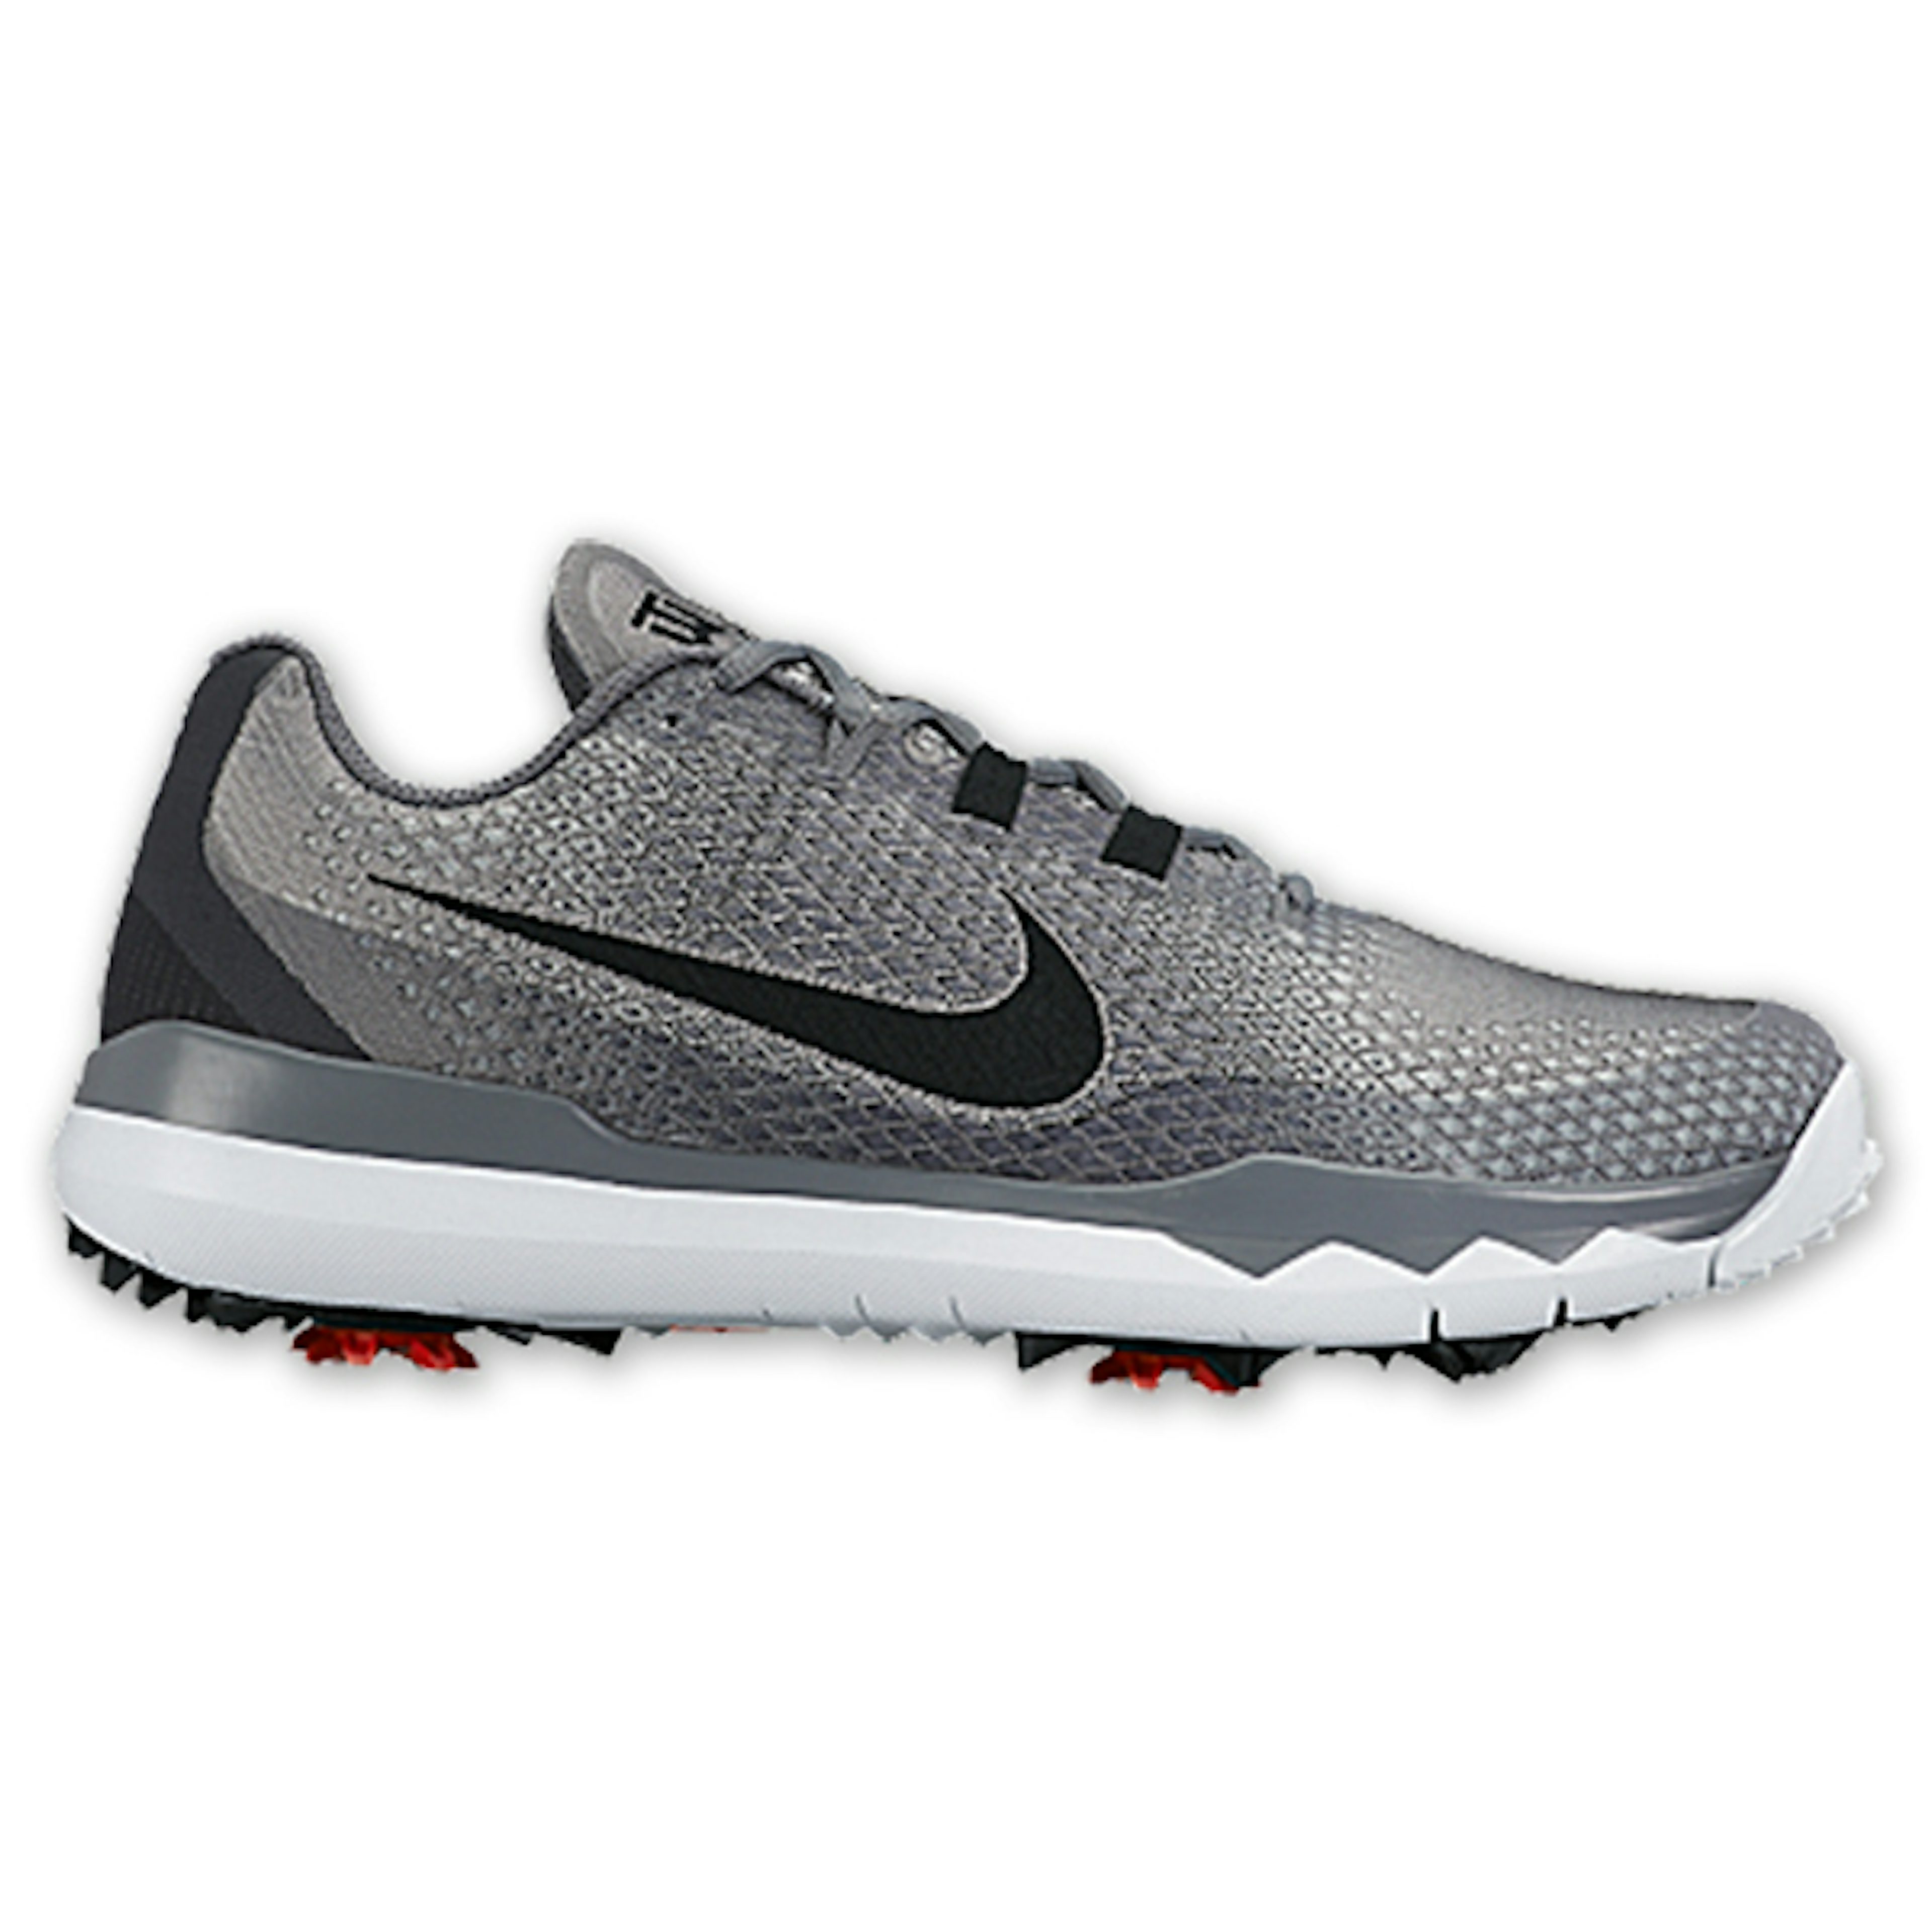 Tiger Woods Nike Golf Shoes: